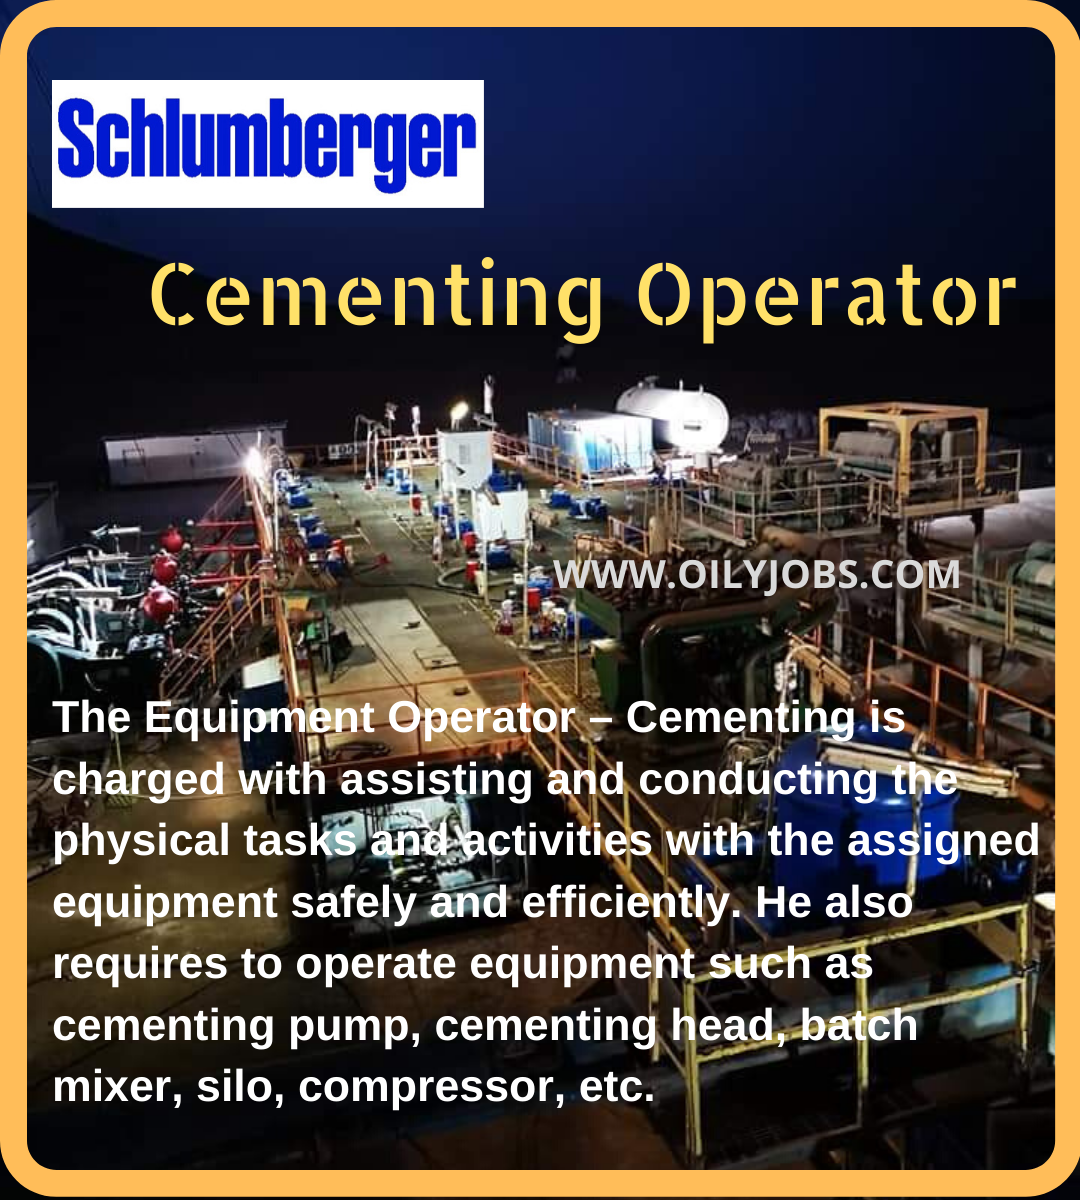 We are looking to hire Cementing Equipment Operators for our operations